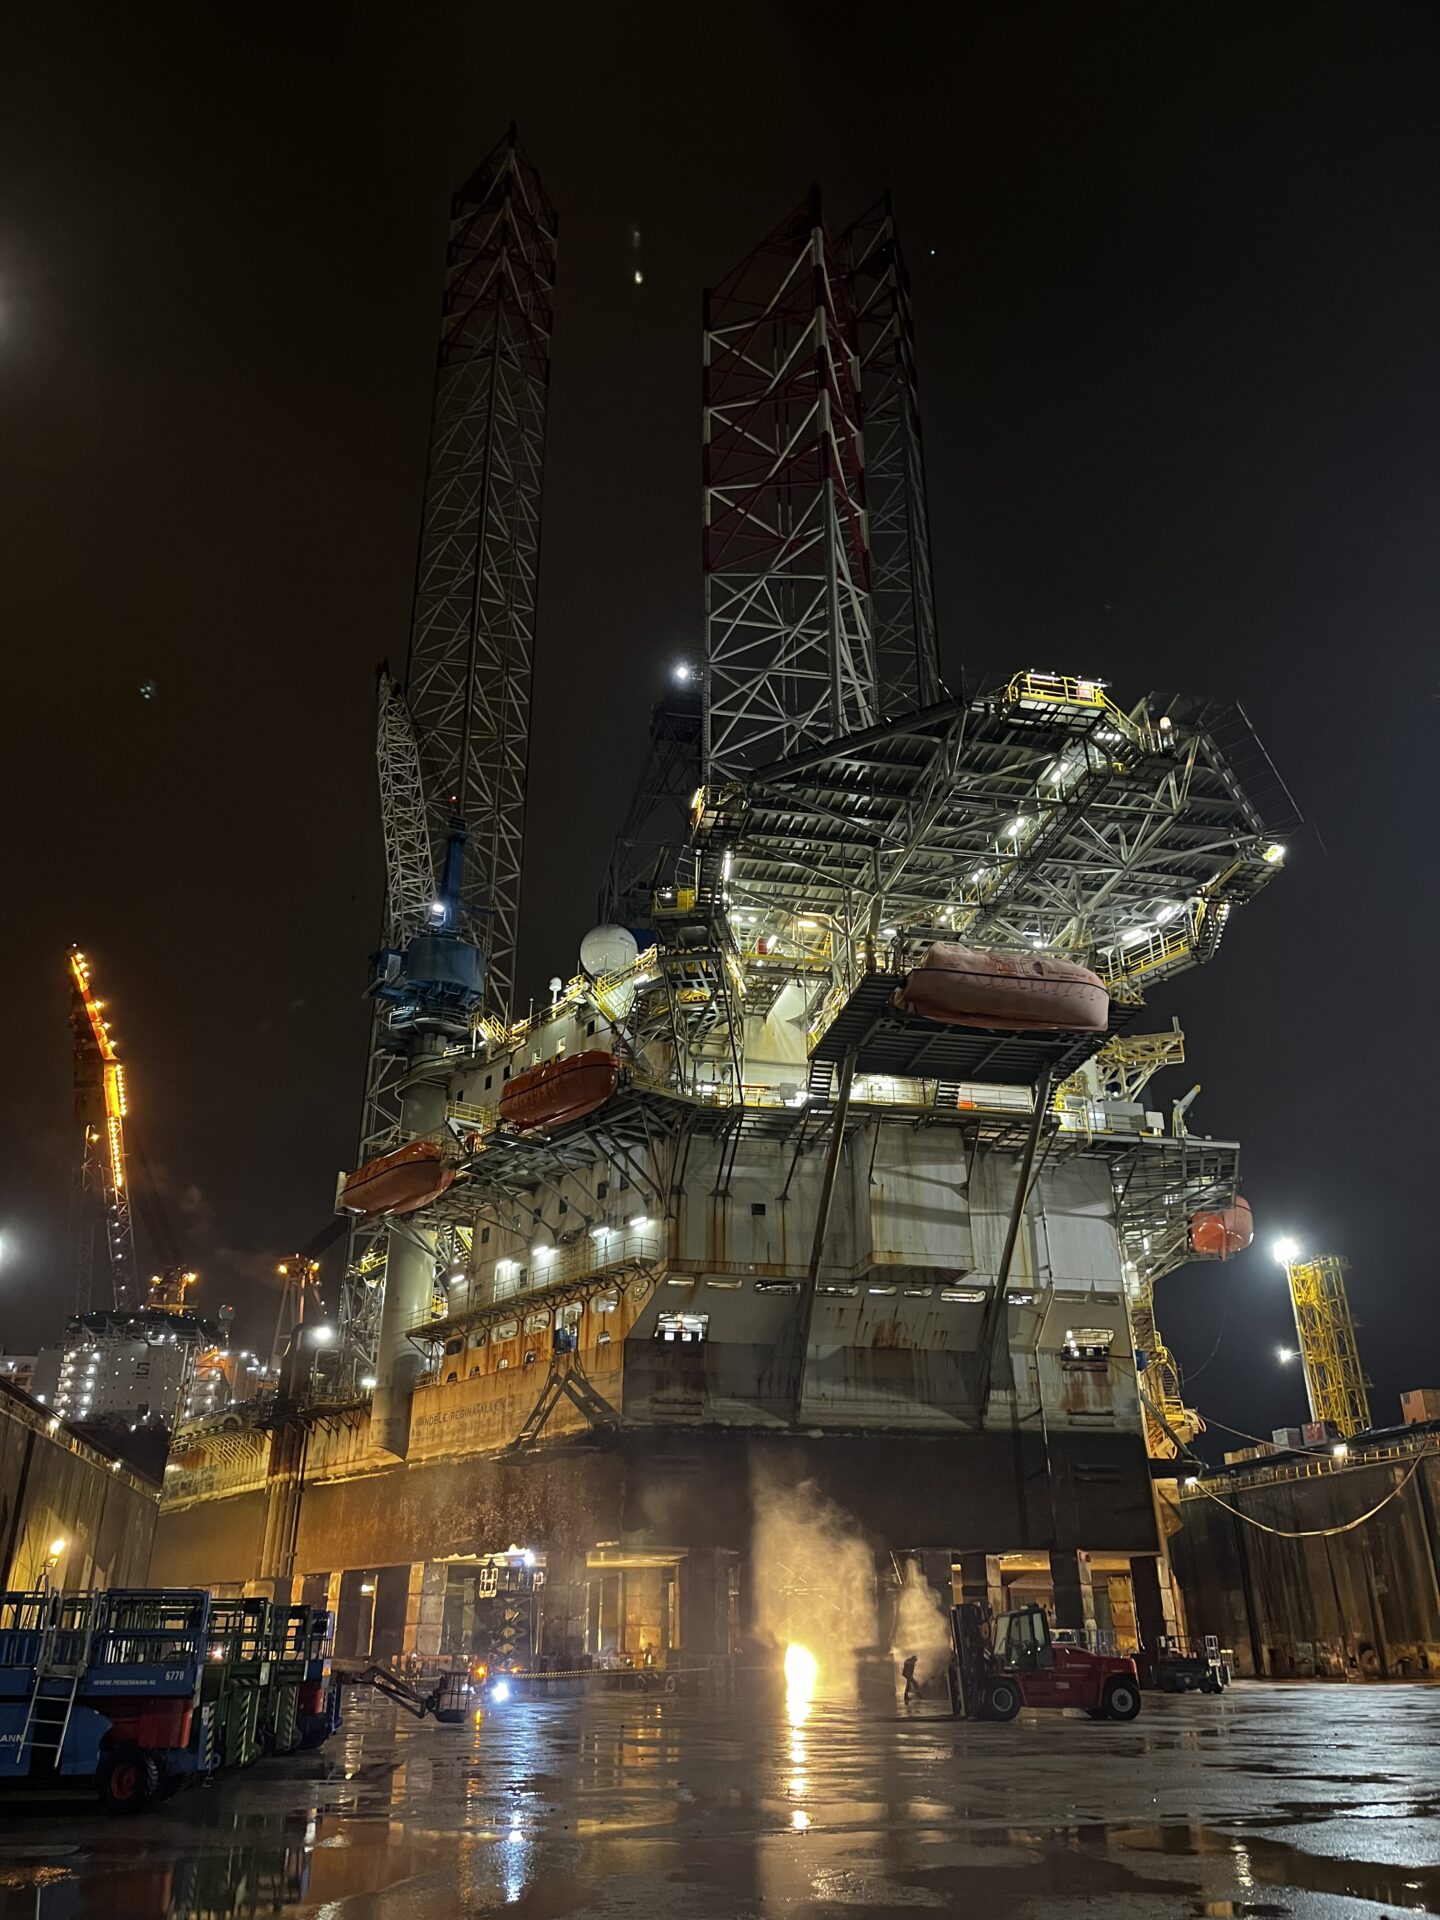 "Breaking barriers: 36 nearly meter-long cuts slice through 180mm thick steel in just 12 days, showcasing the prowess of abrasive waterjet cutting in decommissioning North Sea oil rigs."